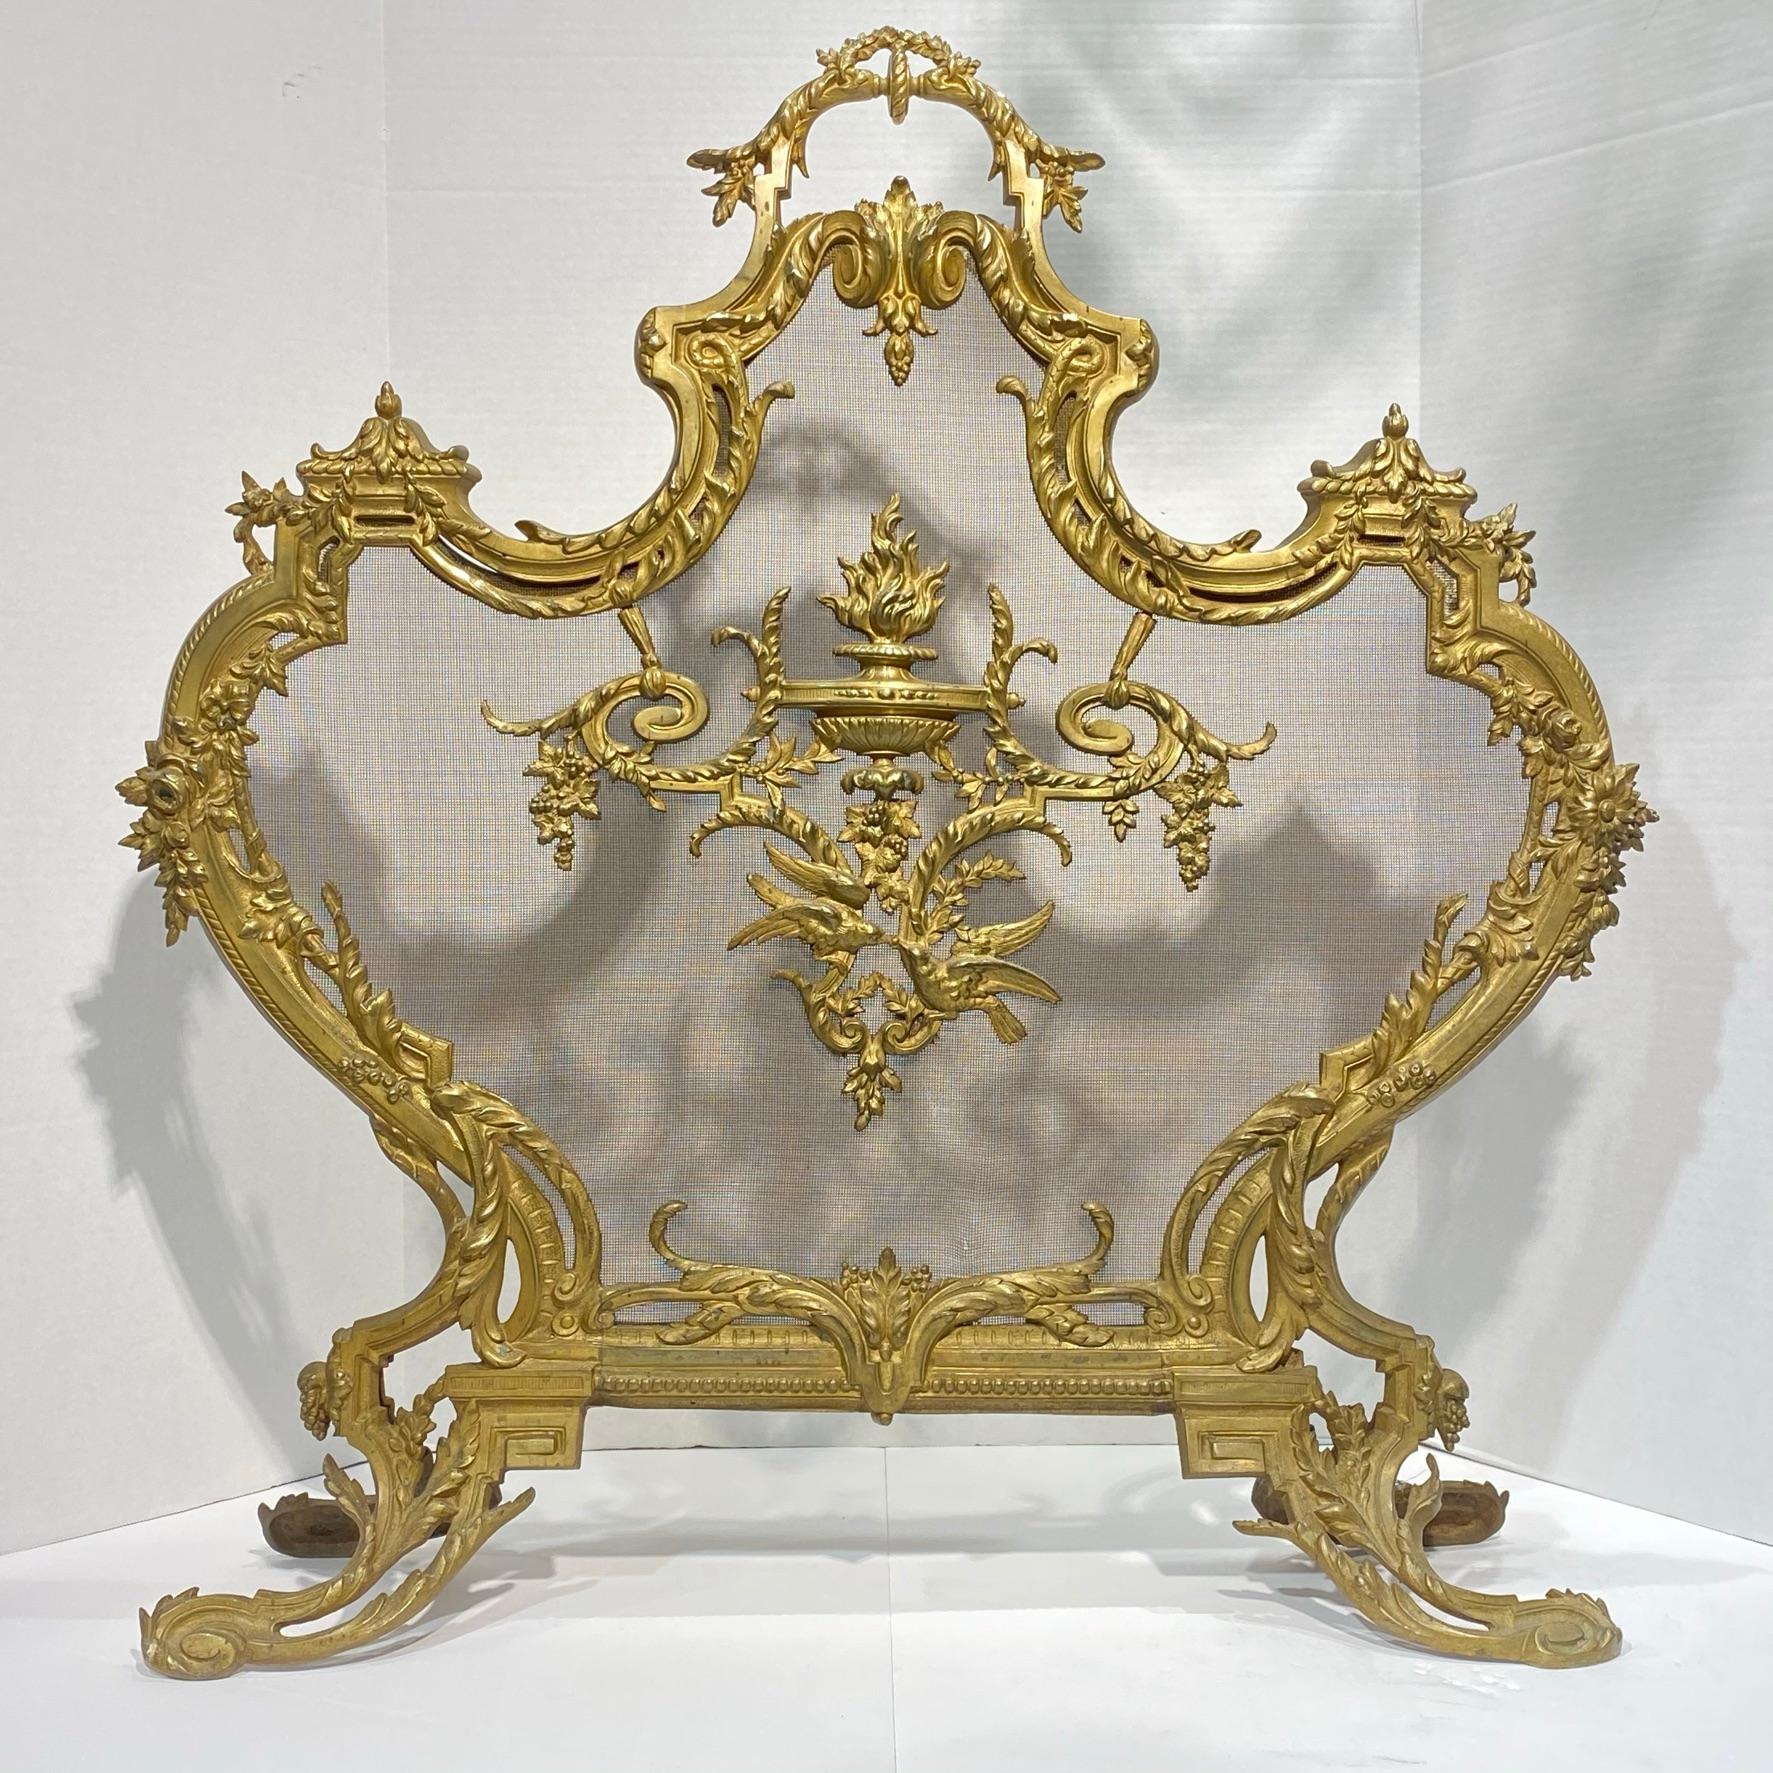 Very fine quality French 19th century Louis XVI style gilt bronze fireplace screen.